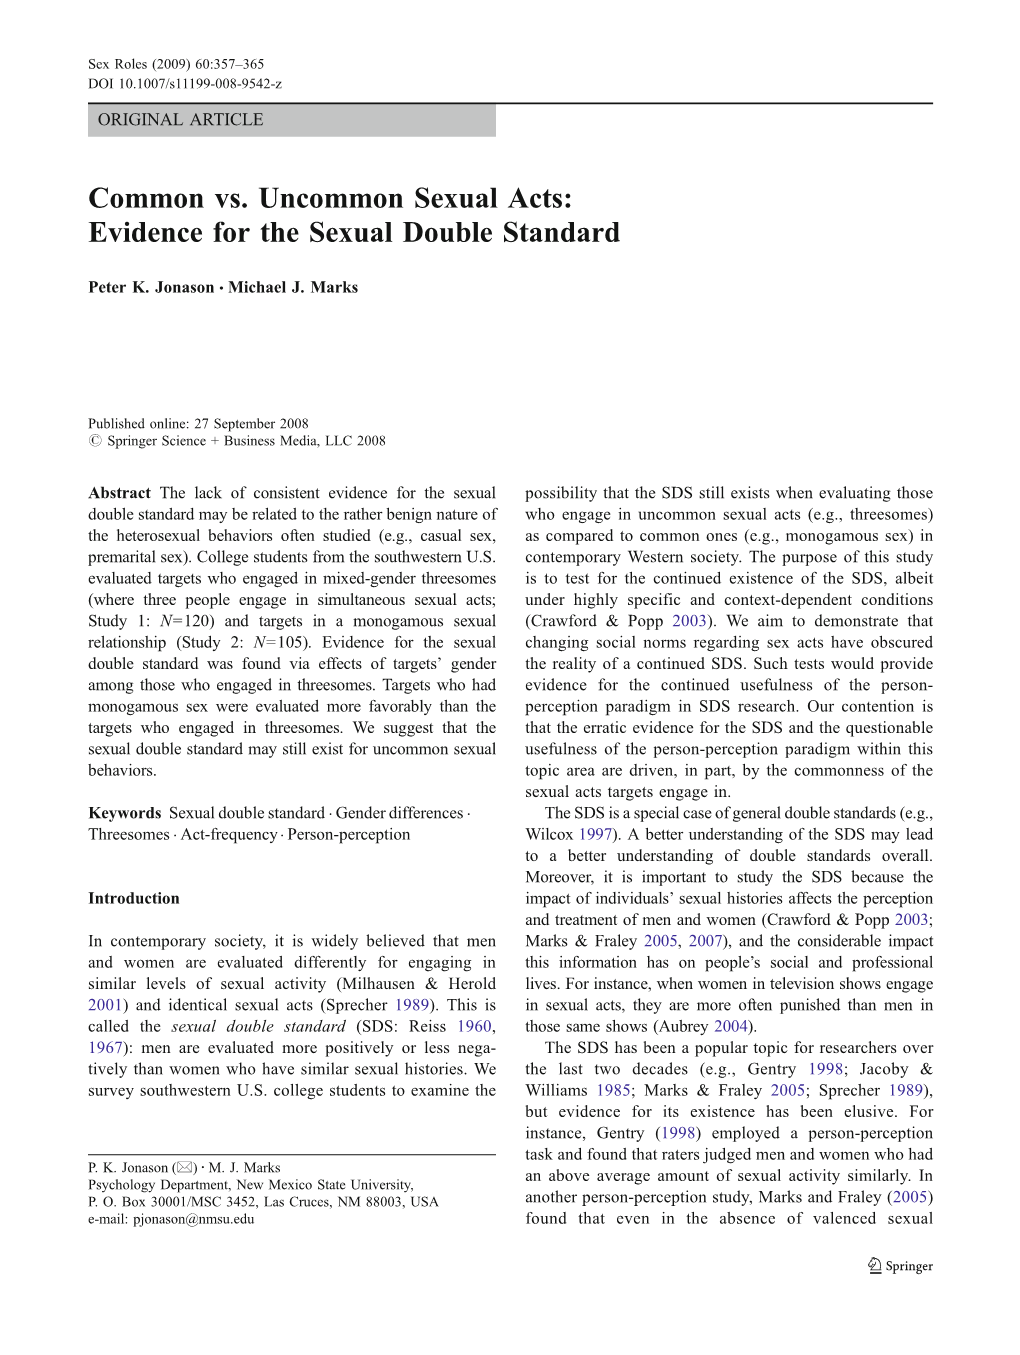 Common Vs. Uncommon Sexual Acts: Evidence for the Sexual Double Standard